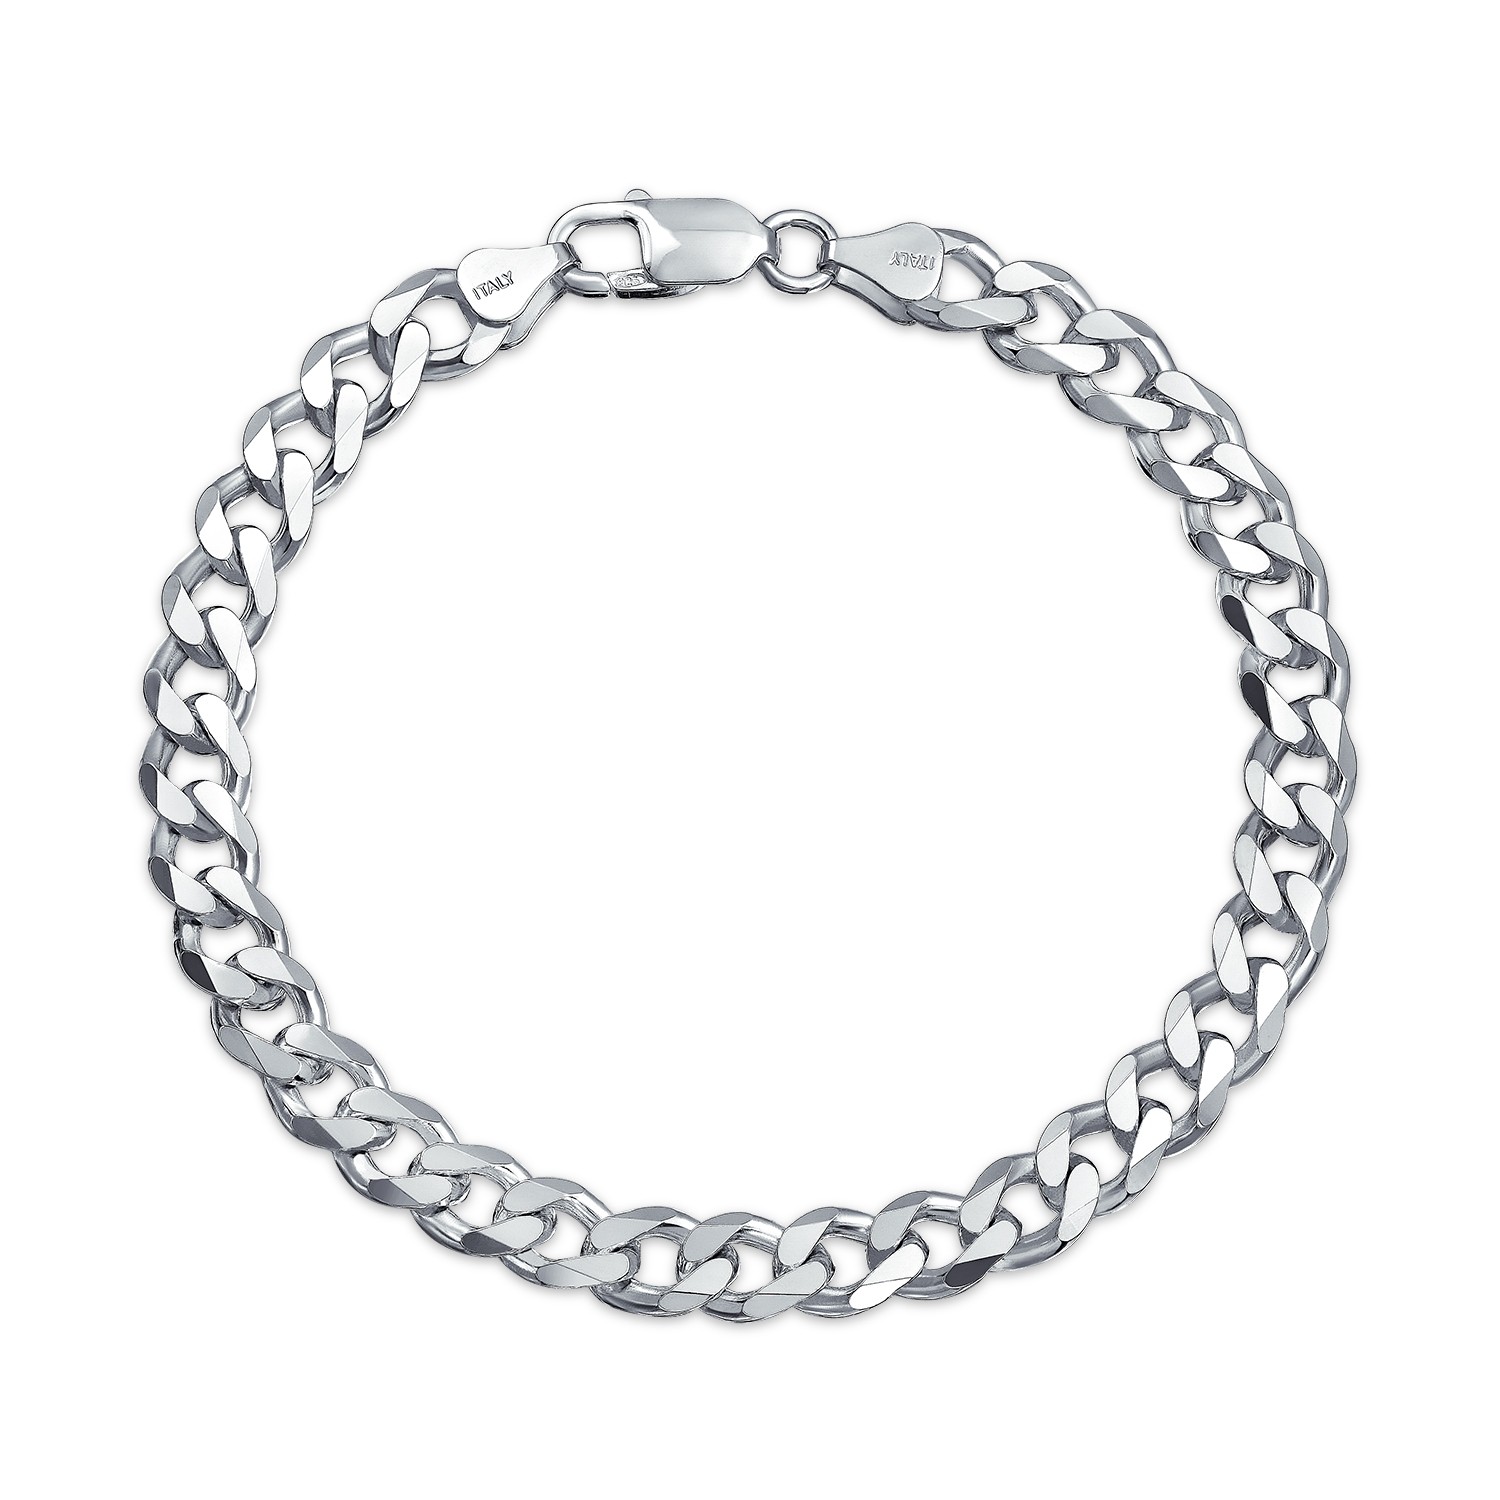 Buy Bracelet Sterling Silver for men of High fashion Curb Chain Design ...